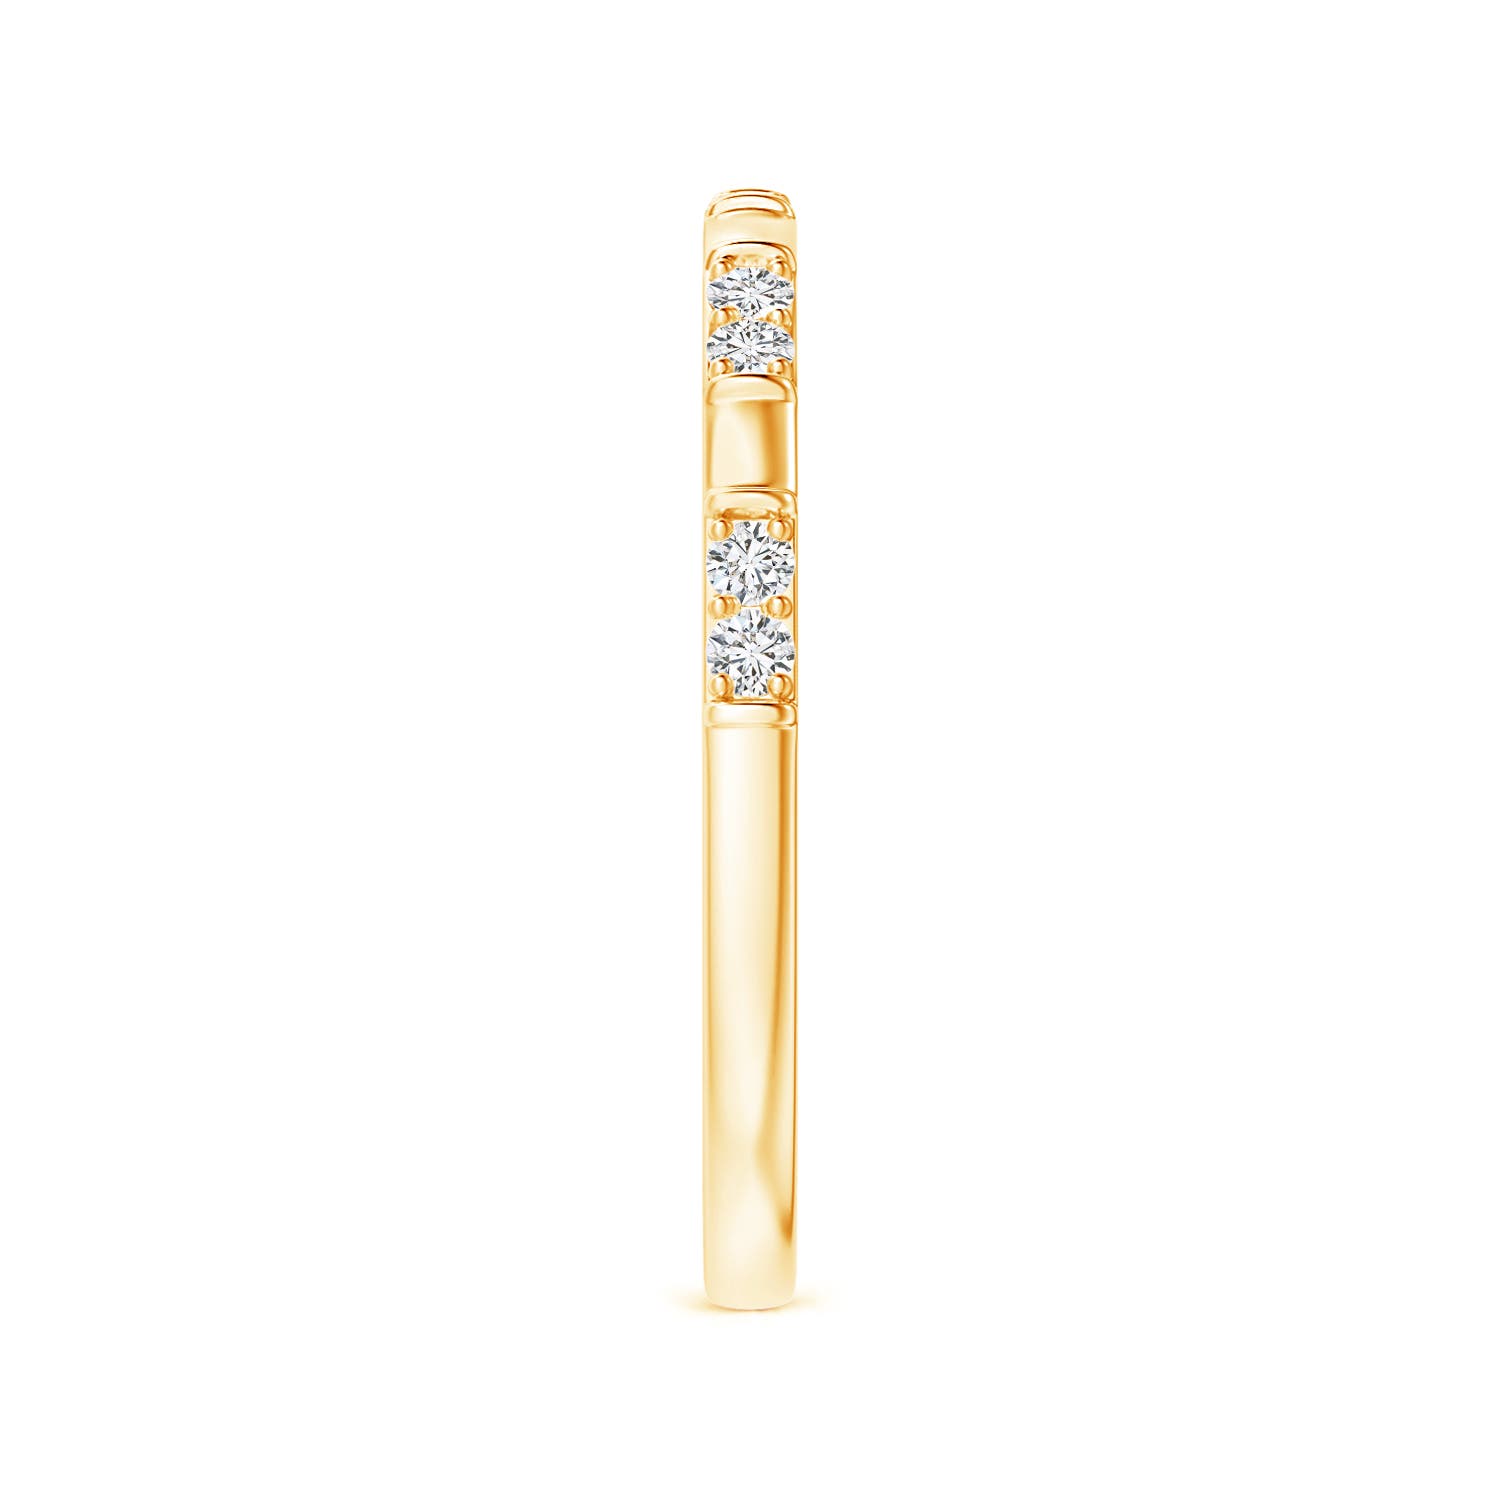 H, SI2 / 0.14 CT / 14 KT Yellow Gold